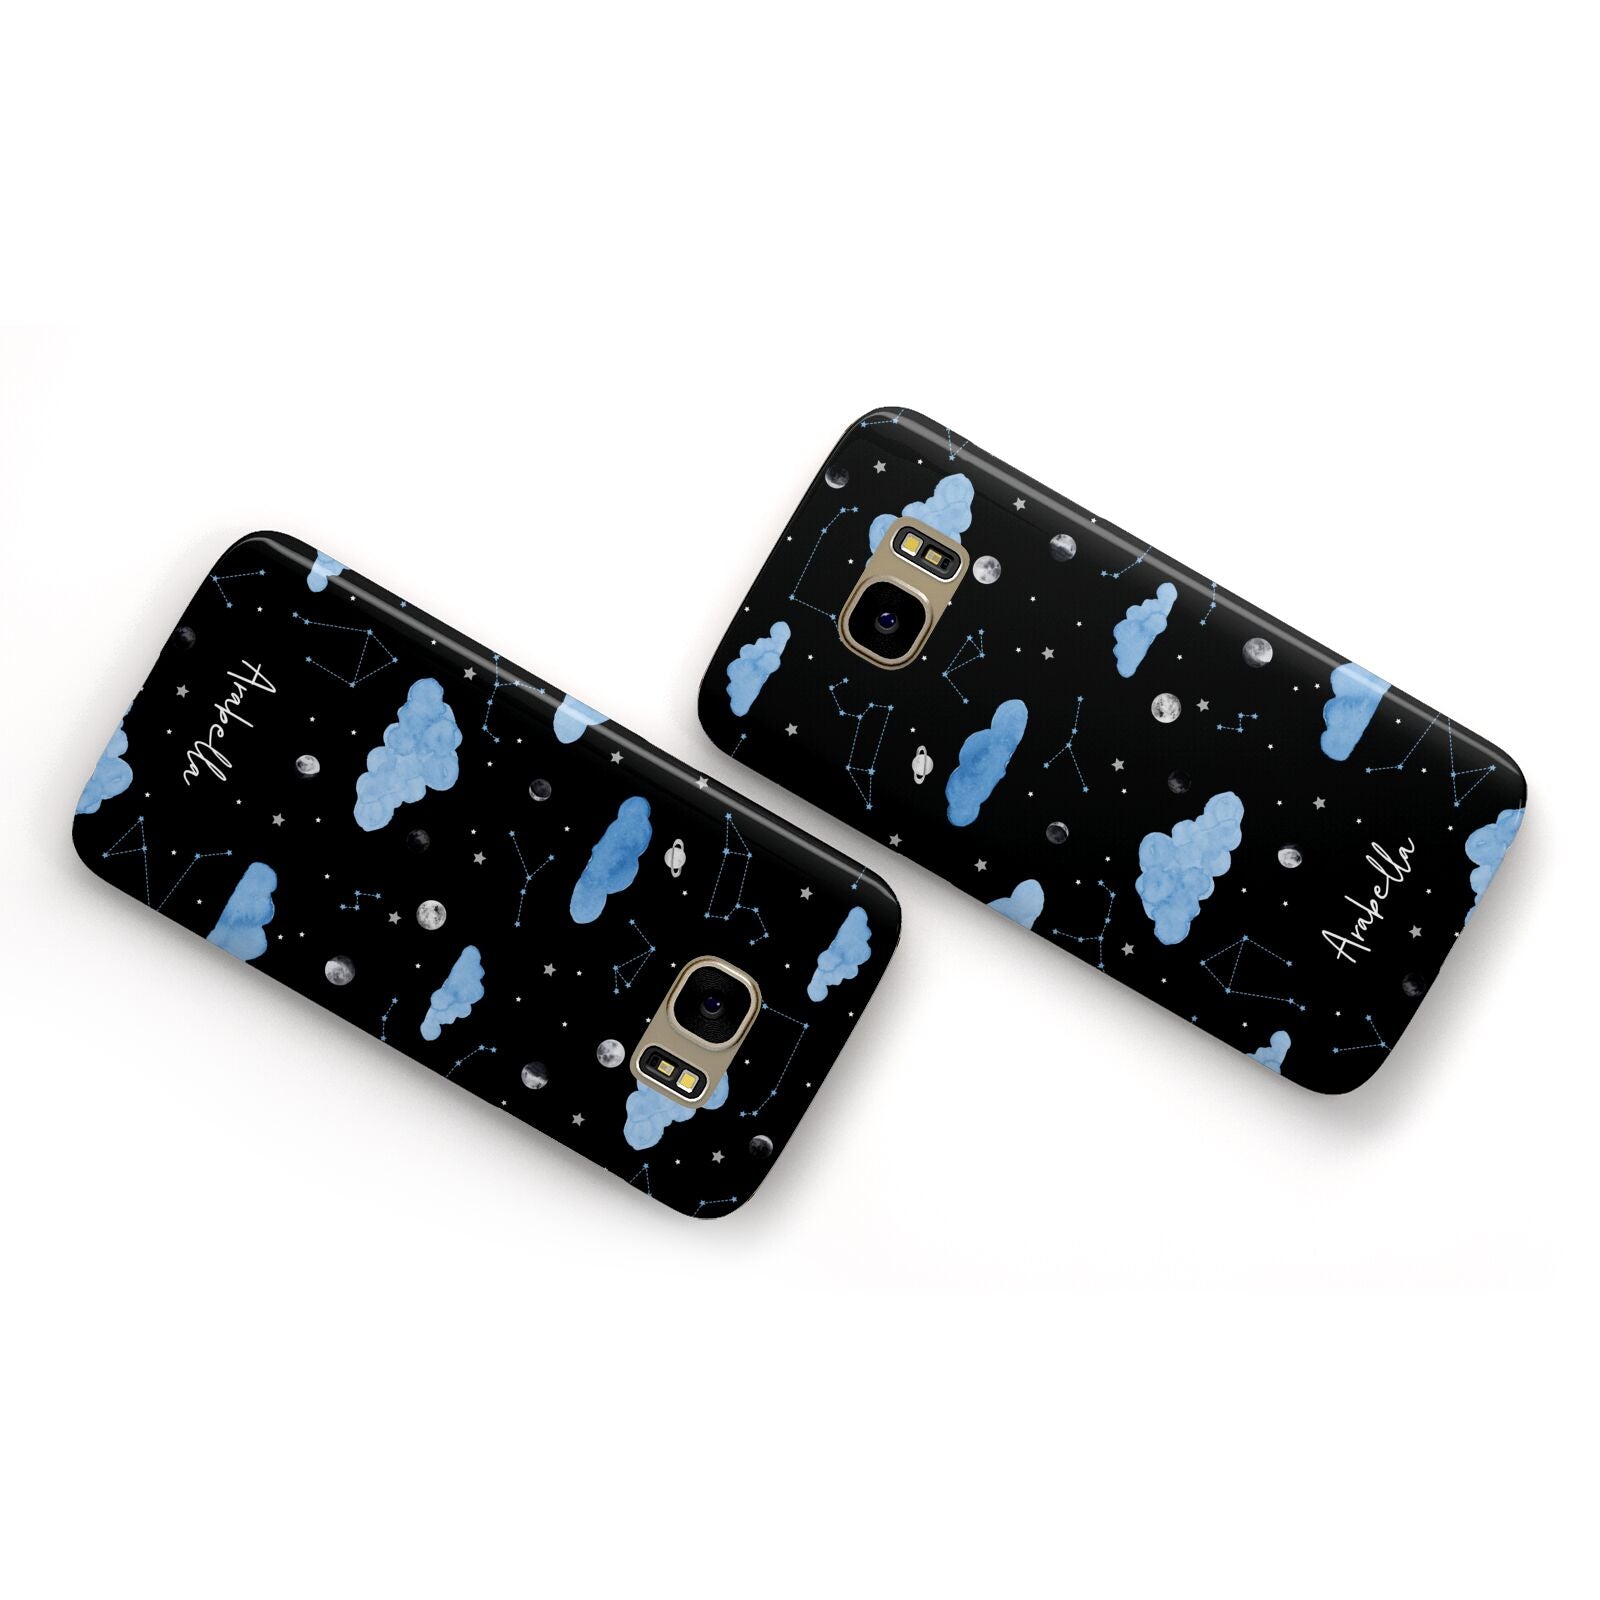 Cloudy Night Sky with Name Samsung Galaxy Case Flat Overview